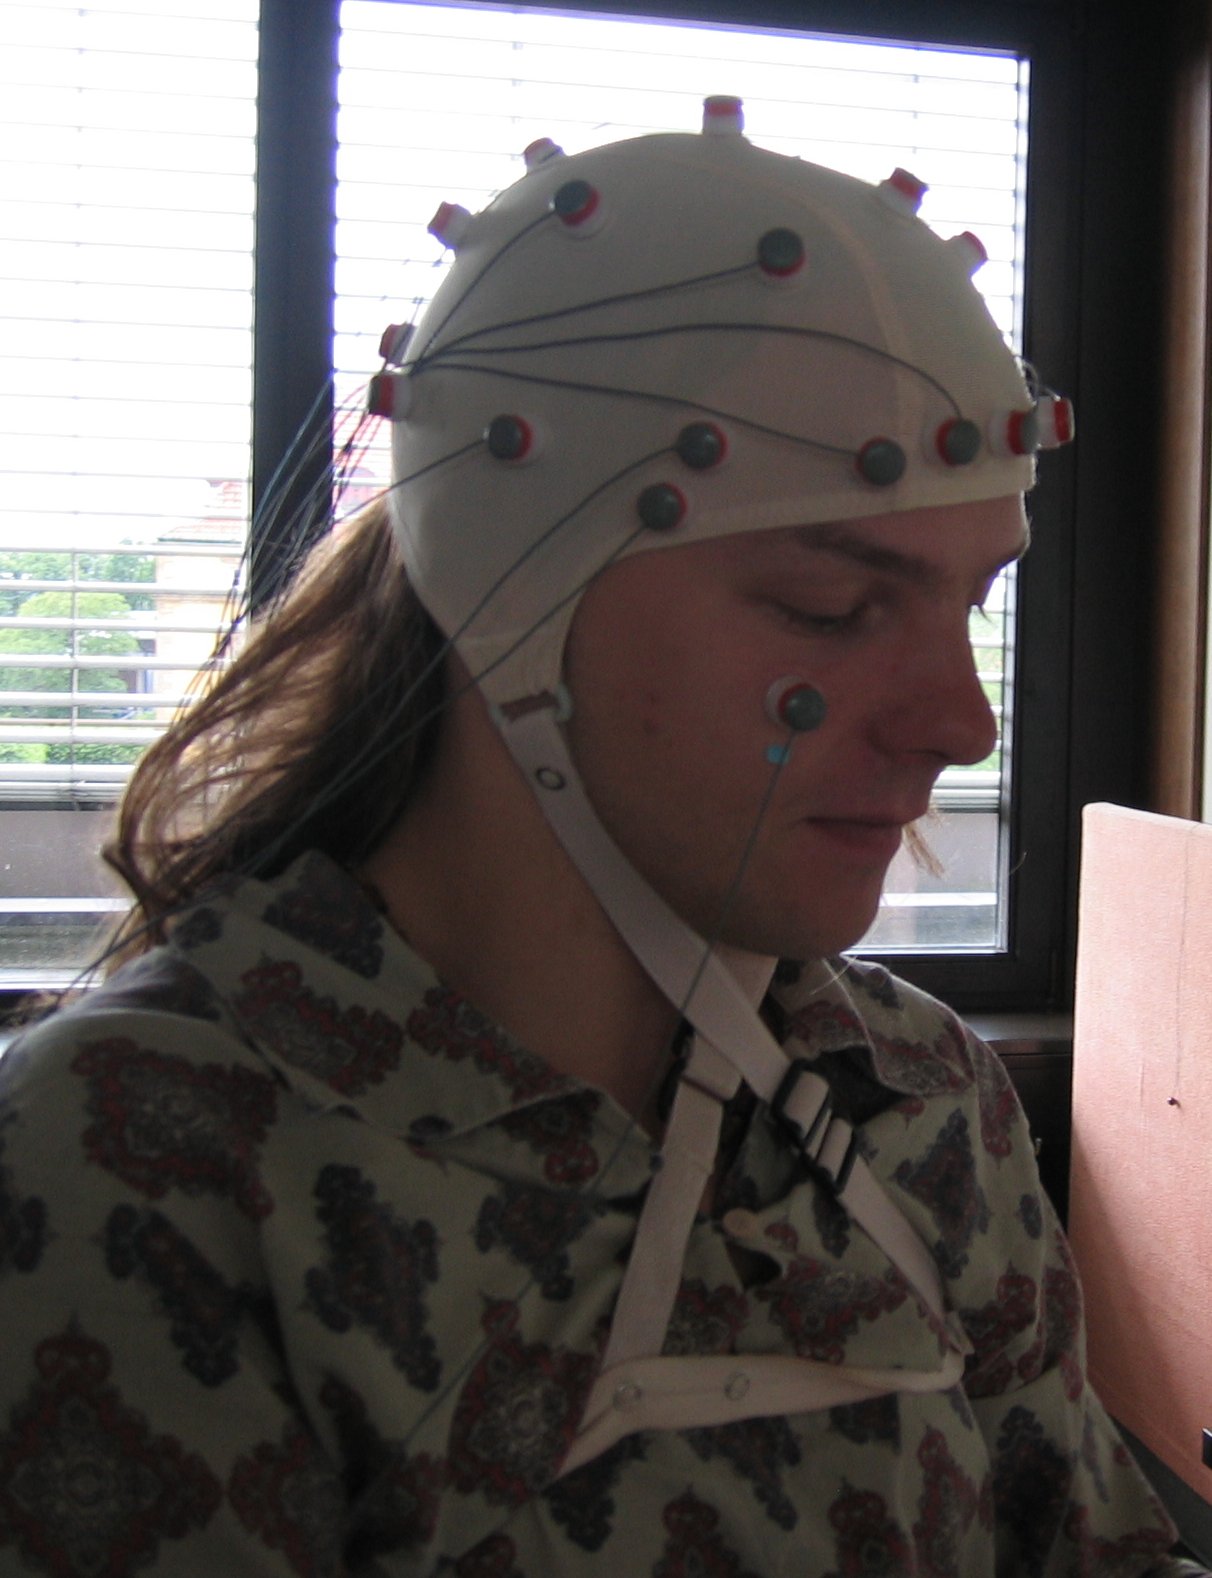 Person wearing electrodes for EEG